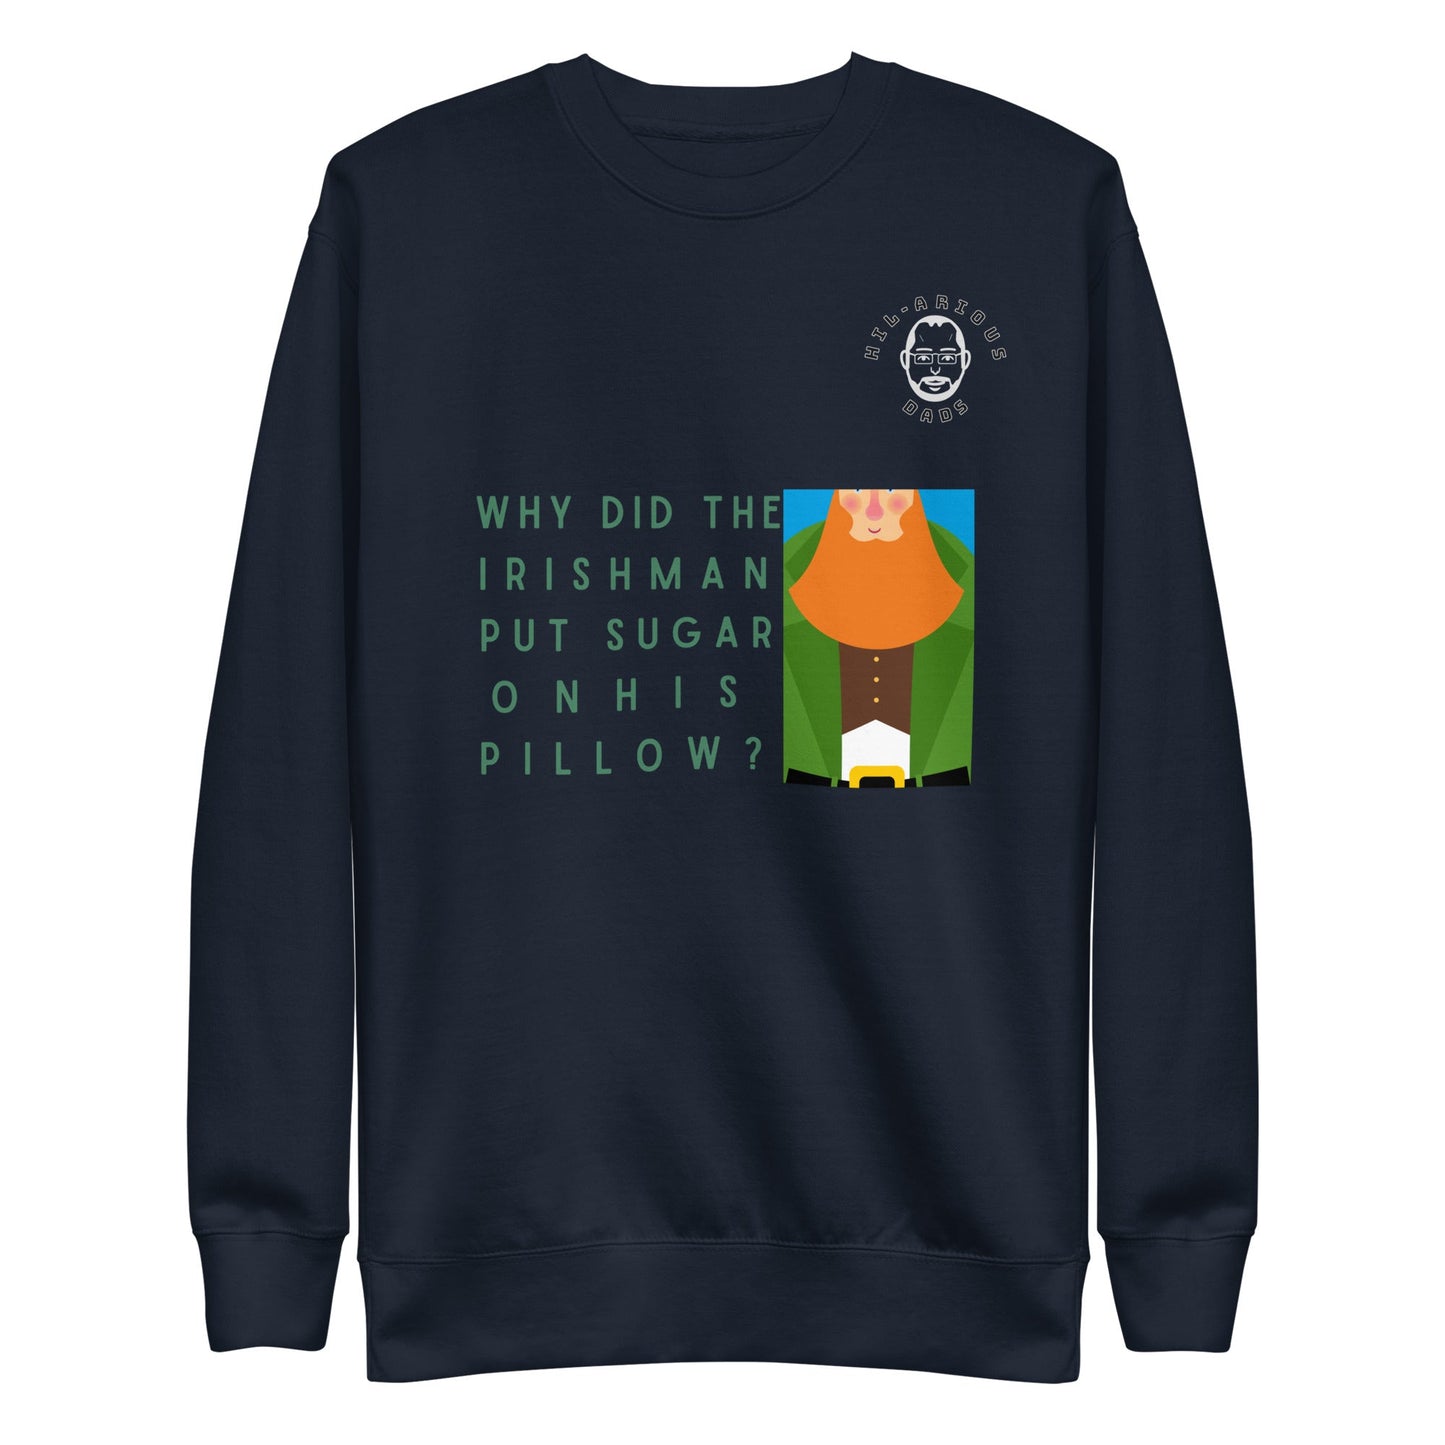 Why did the Irishman put sugar on his pillow?-Sweatshirt - Hil-arious Dads